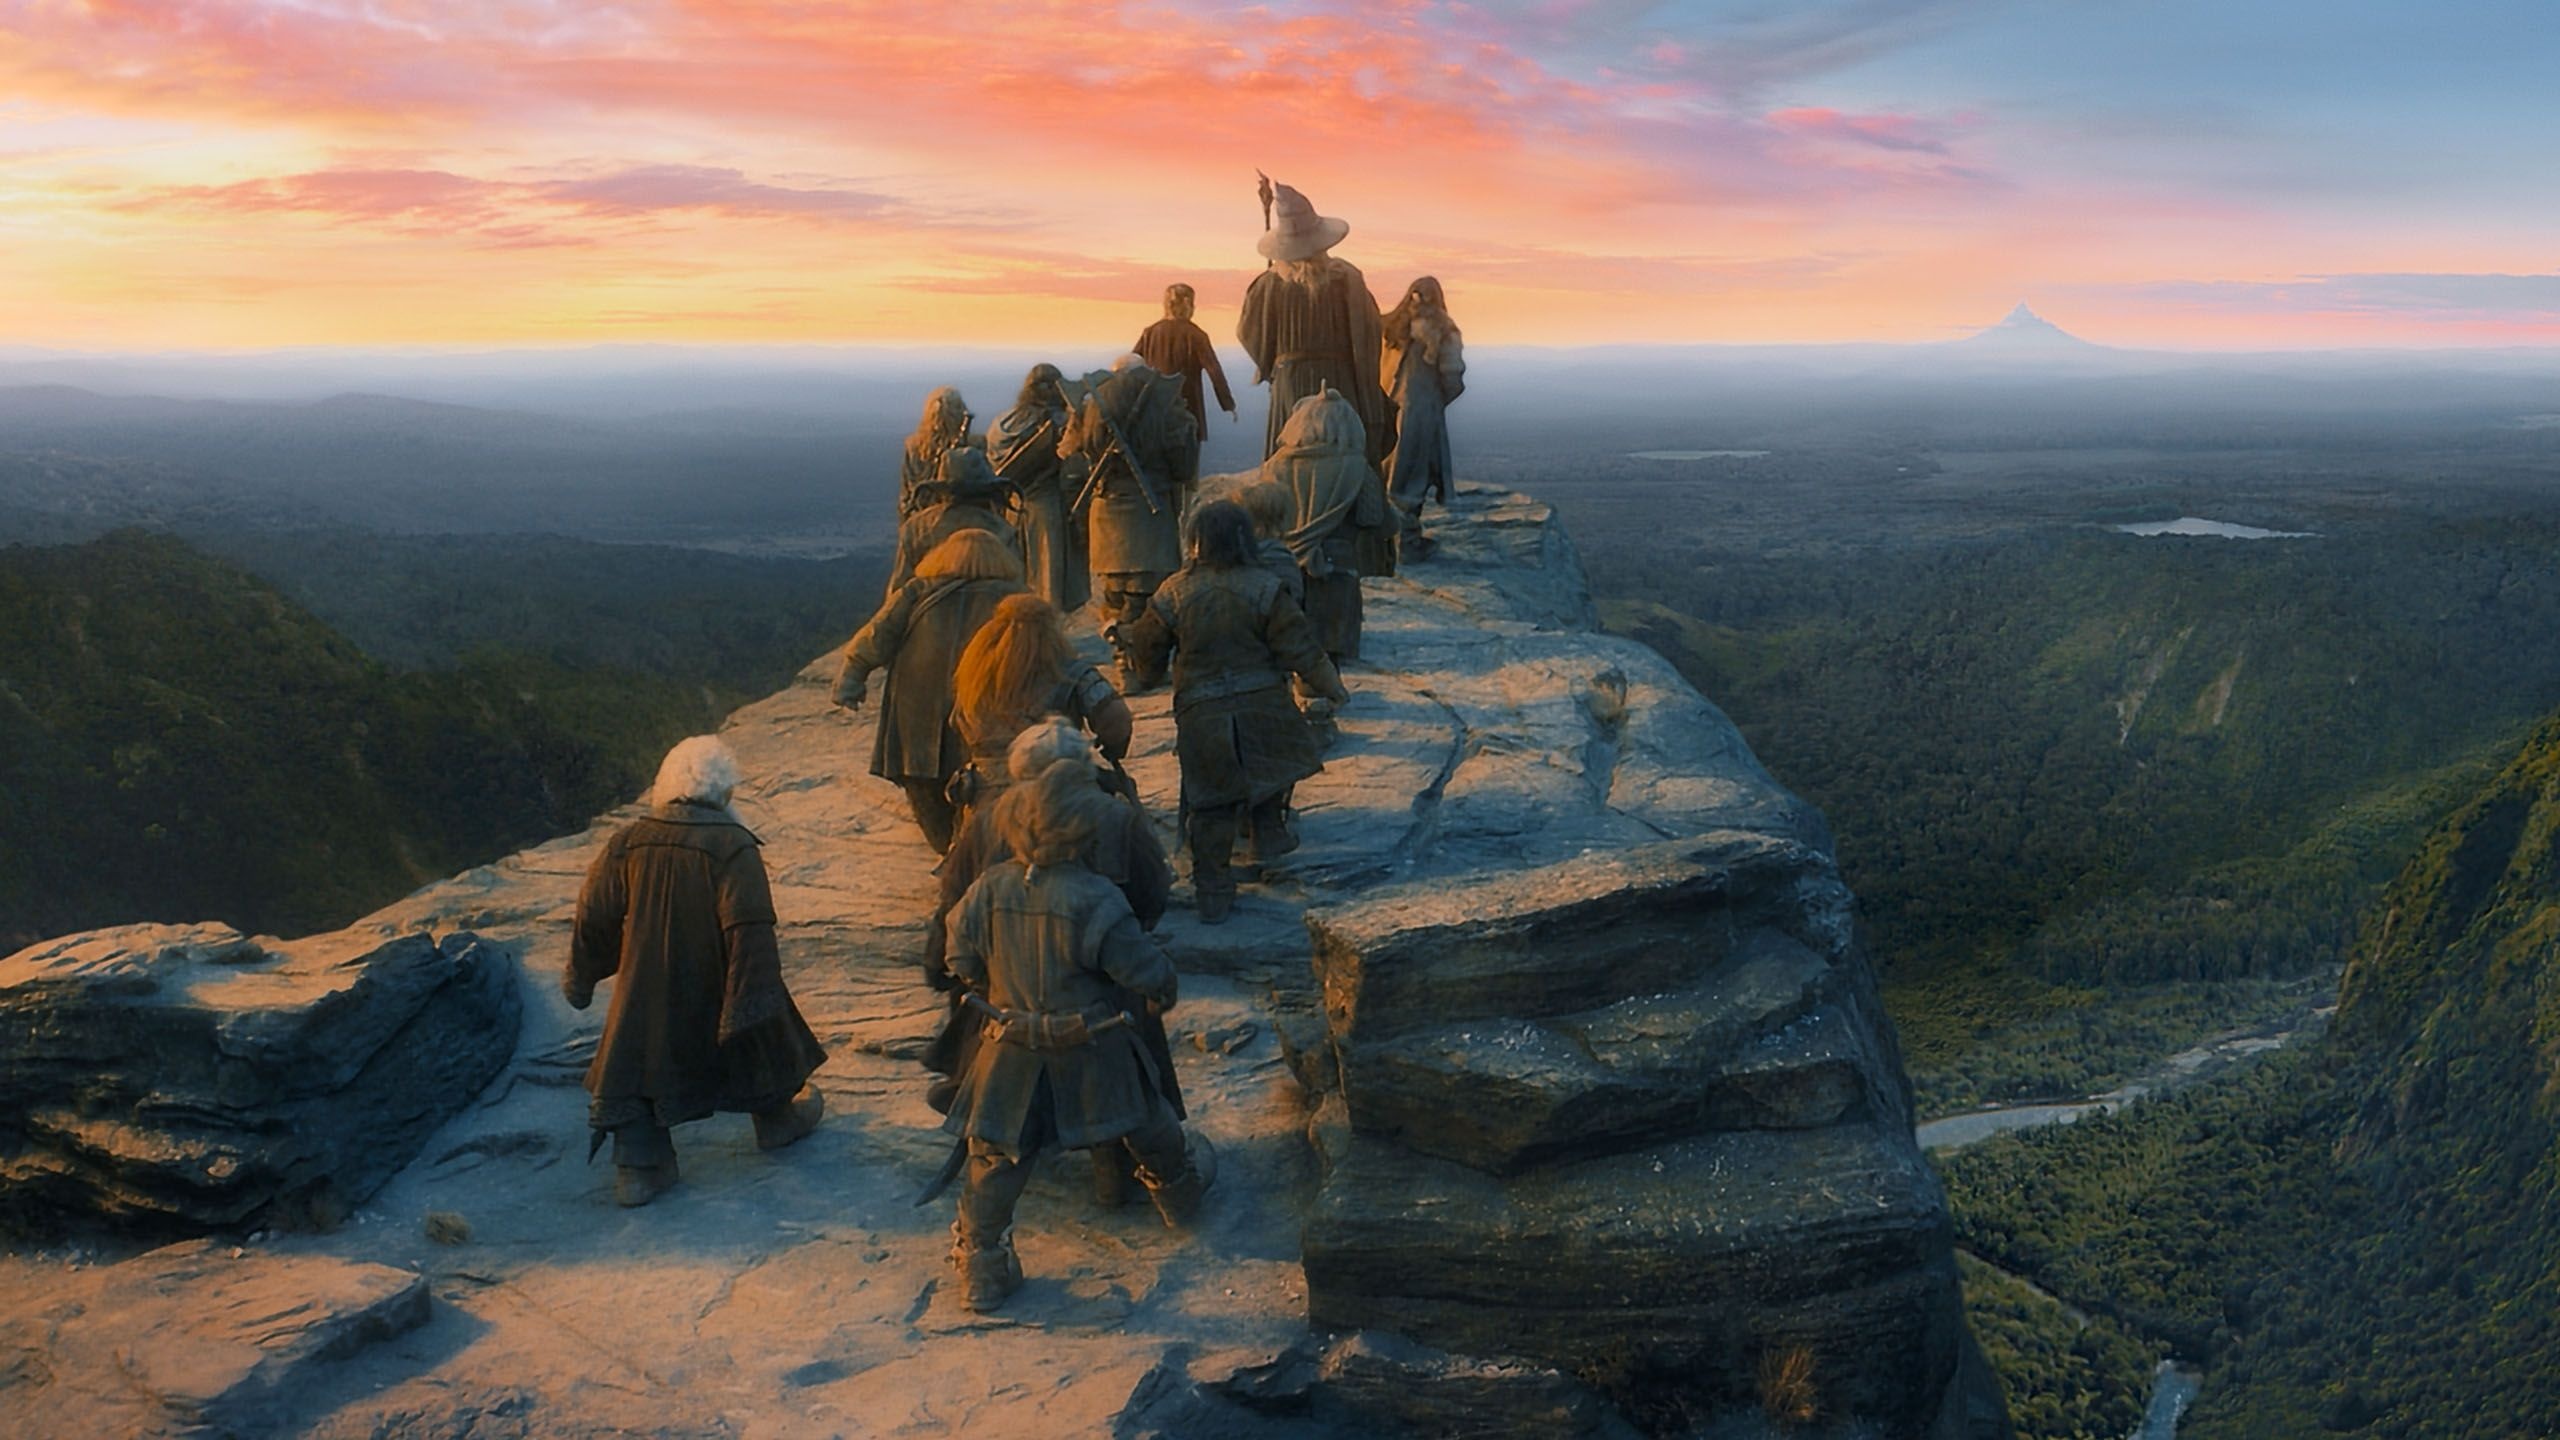 The Hobbit, Unexpected journey, Movies anywhere, Extended edition, 2560x1440 HD Desktop